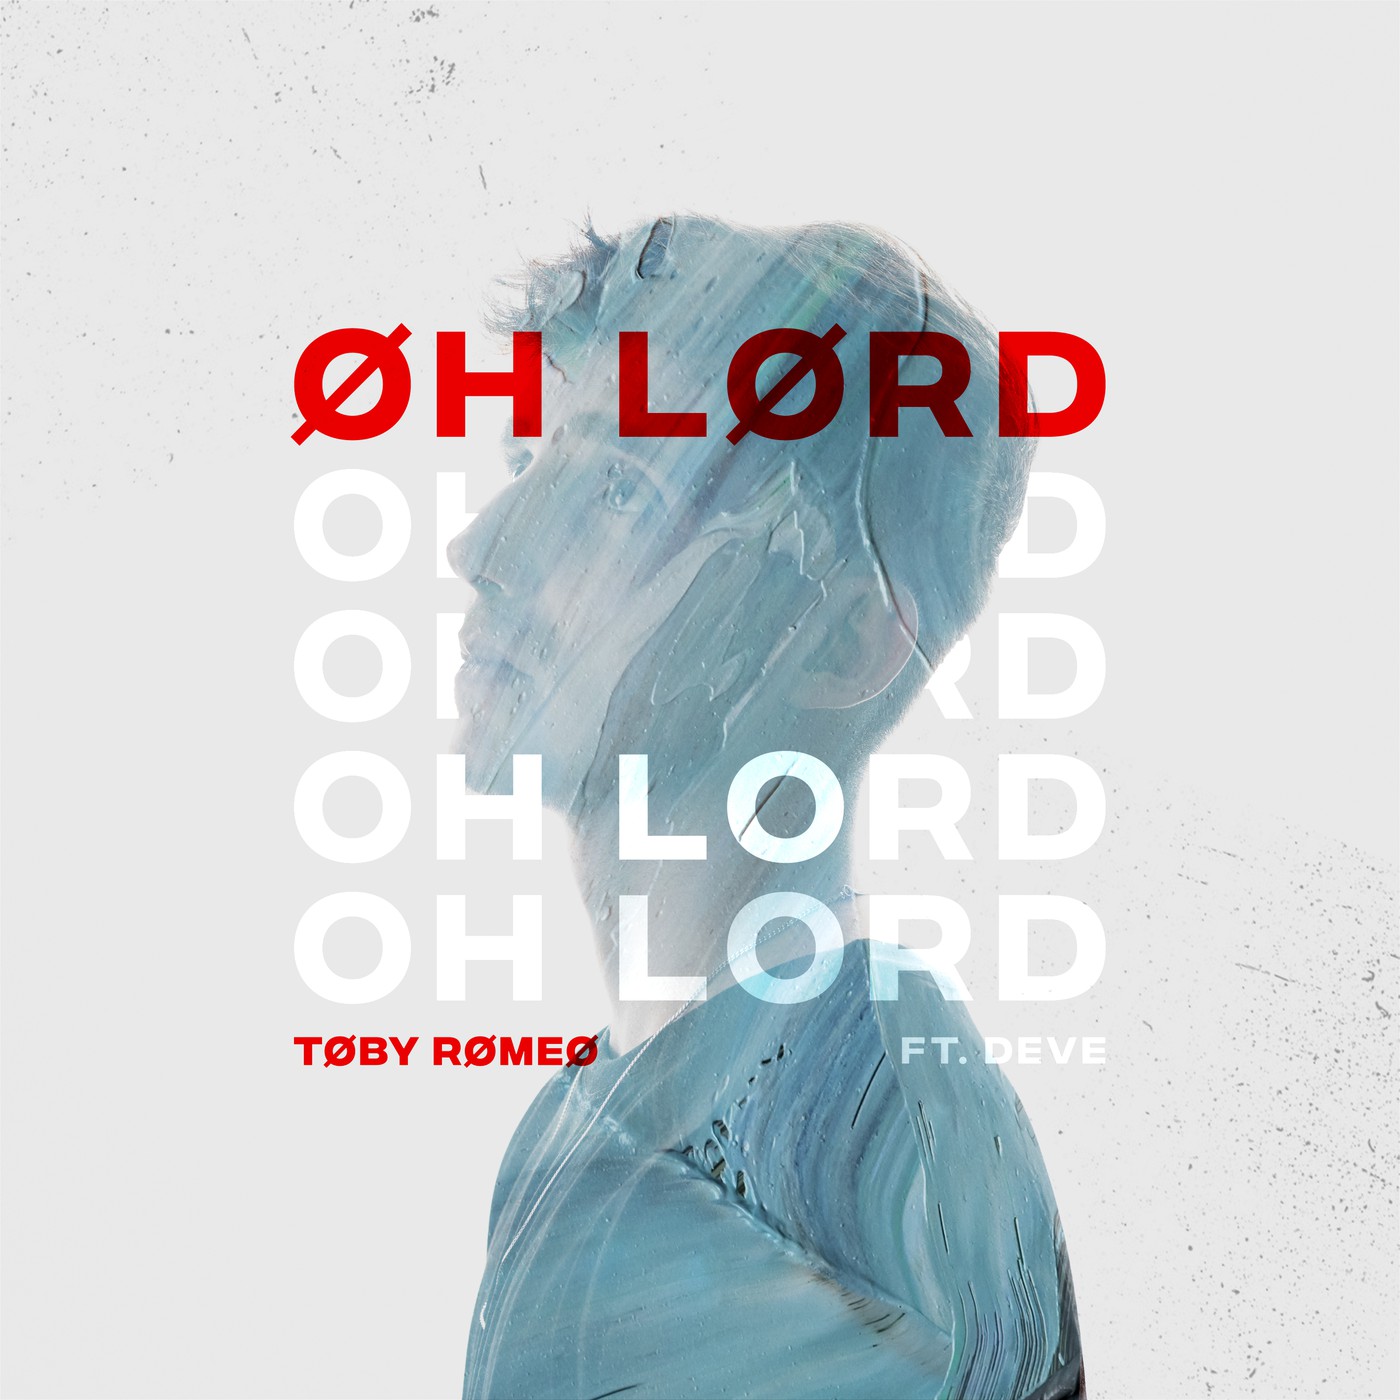 Toby Romero ft Deve - Oh Lord